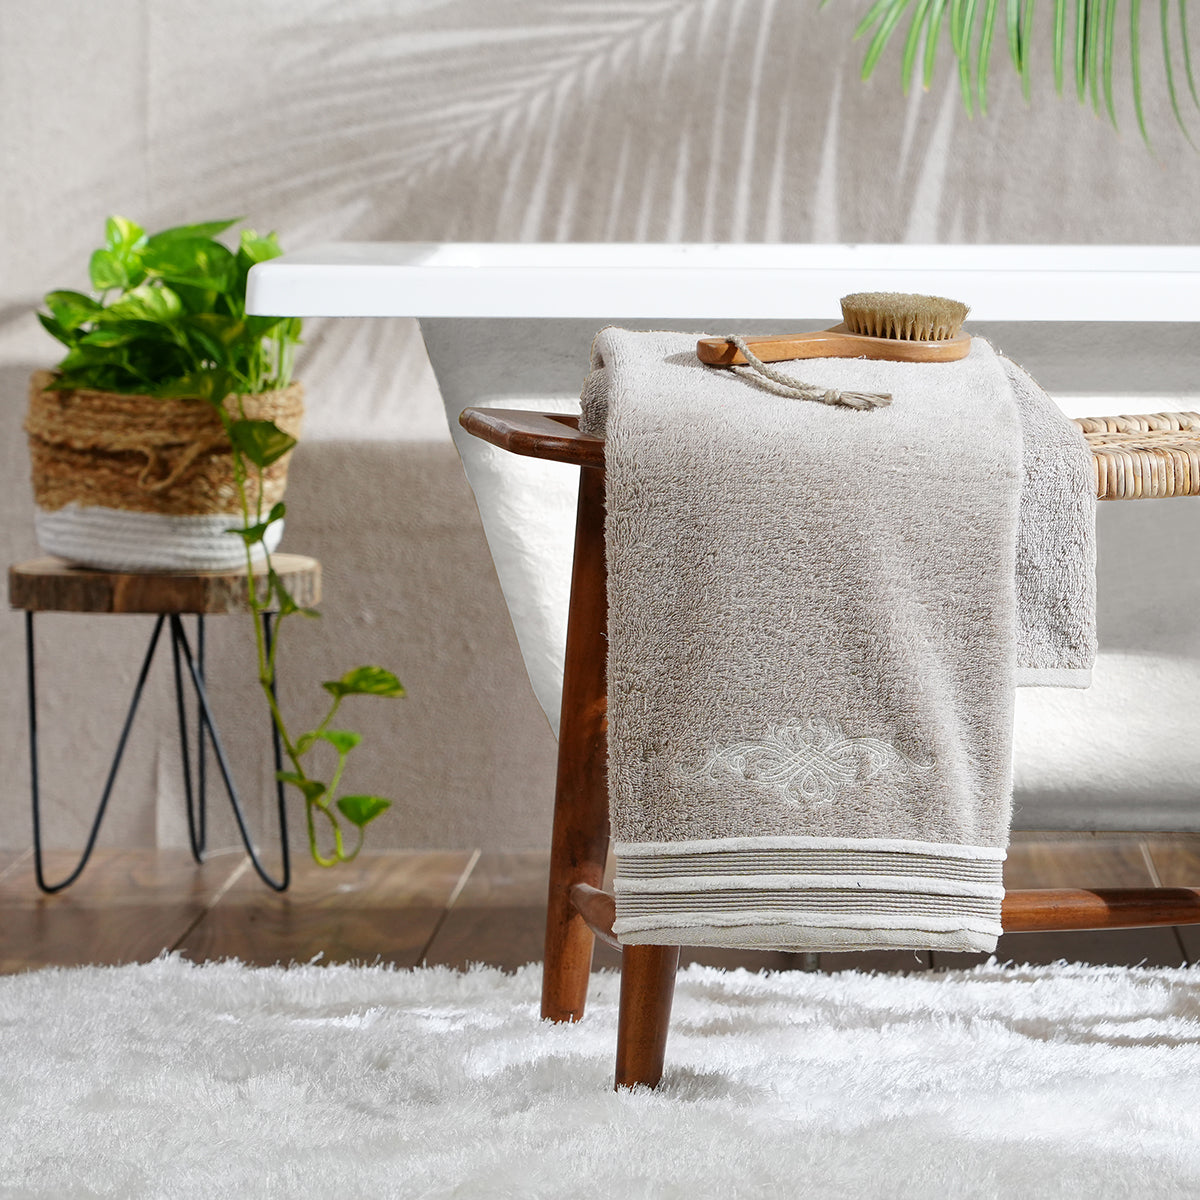 Tranquil Essence Cross Wise Anti-Bacterial, Anti-Fungal and Odour Resistant Beige Towel 70X140